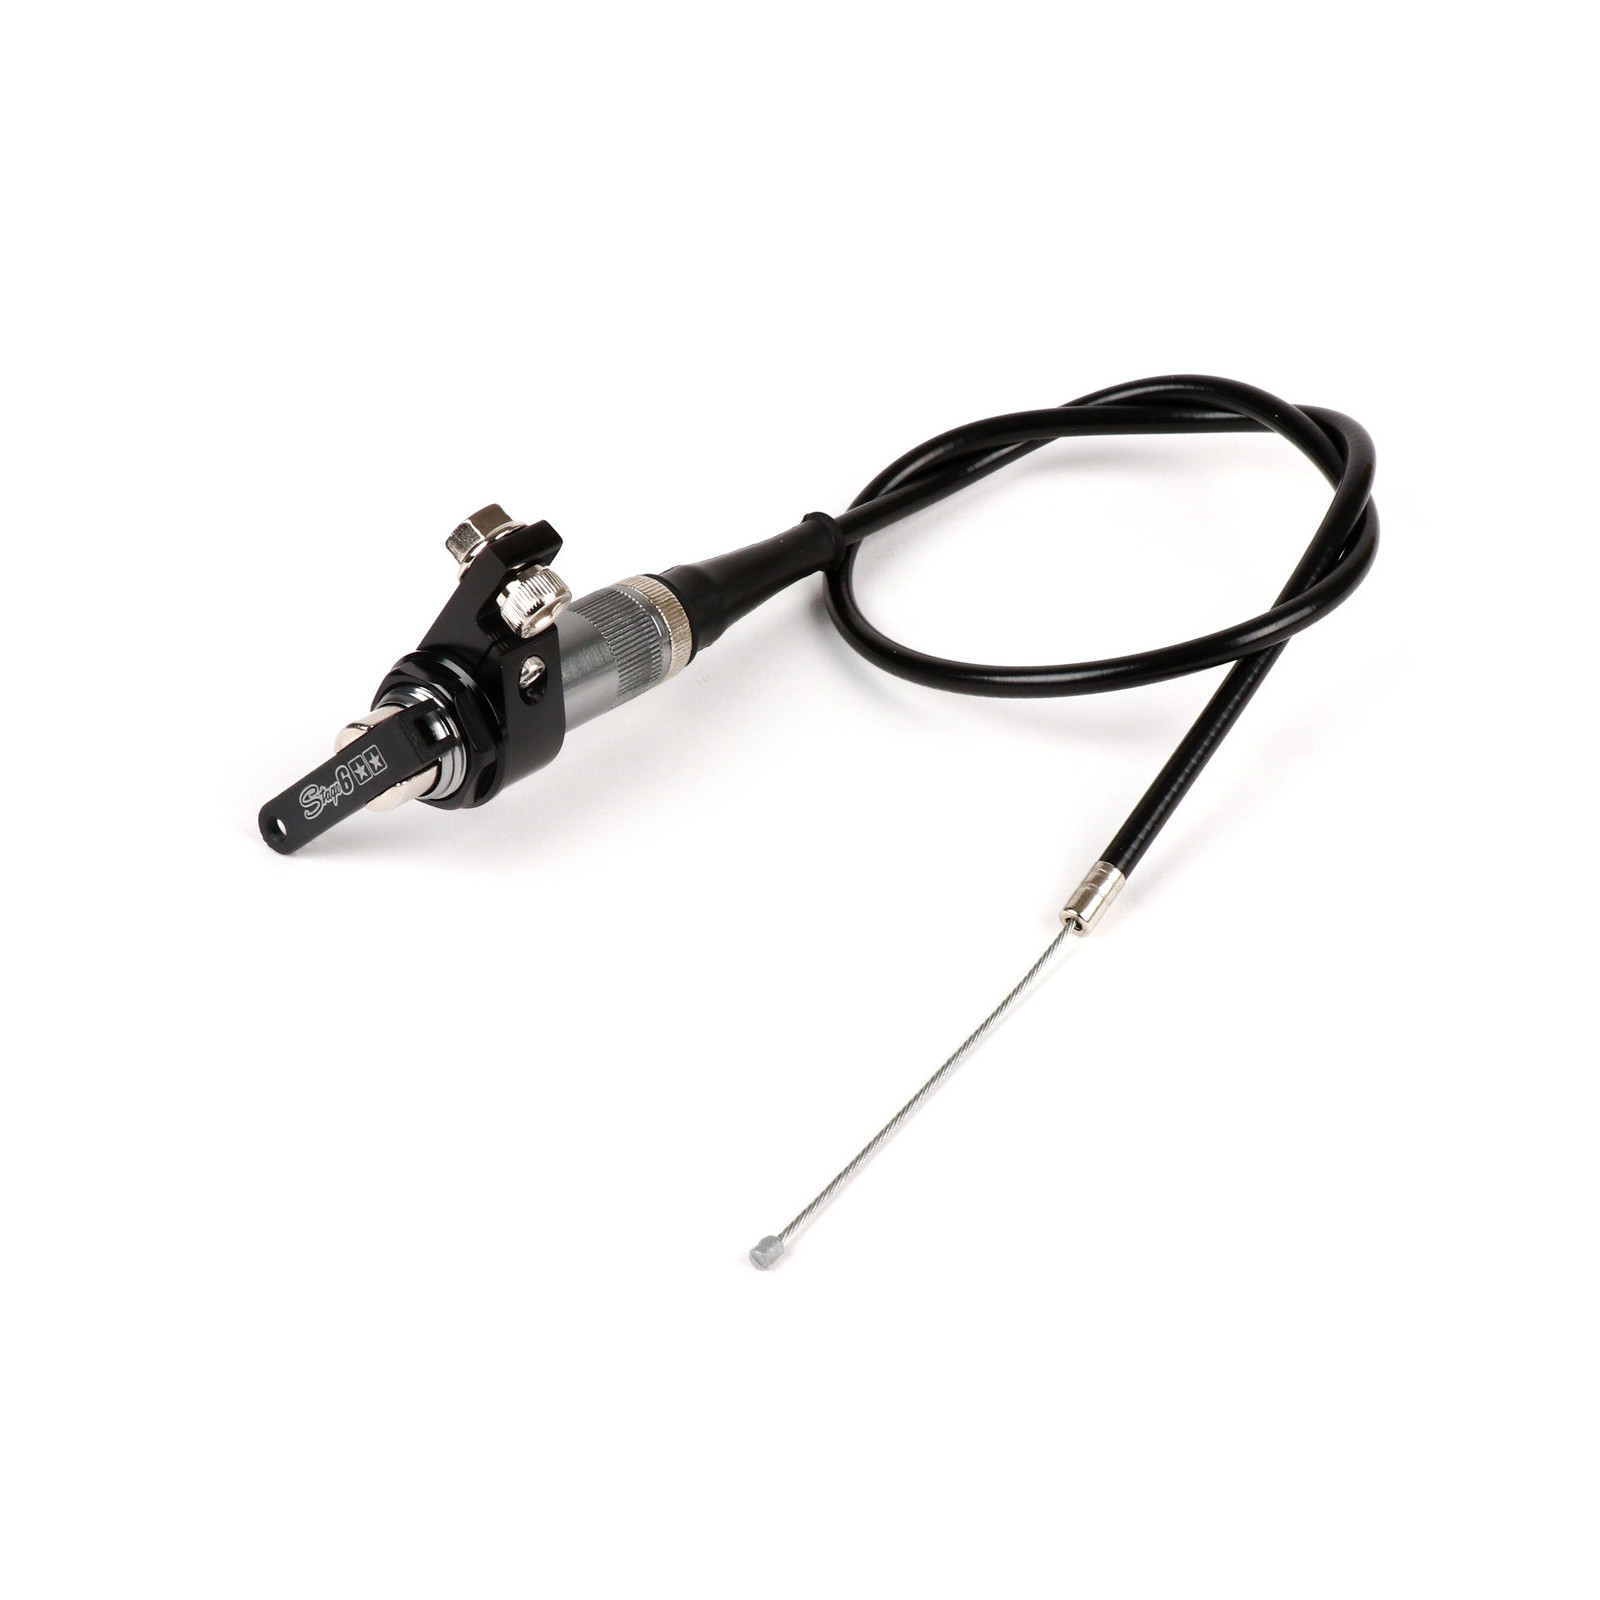 manette commande starter + cable 150 cm stage6 universel adaptable carburateur scooter moto 50 mecaboite ...